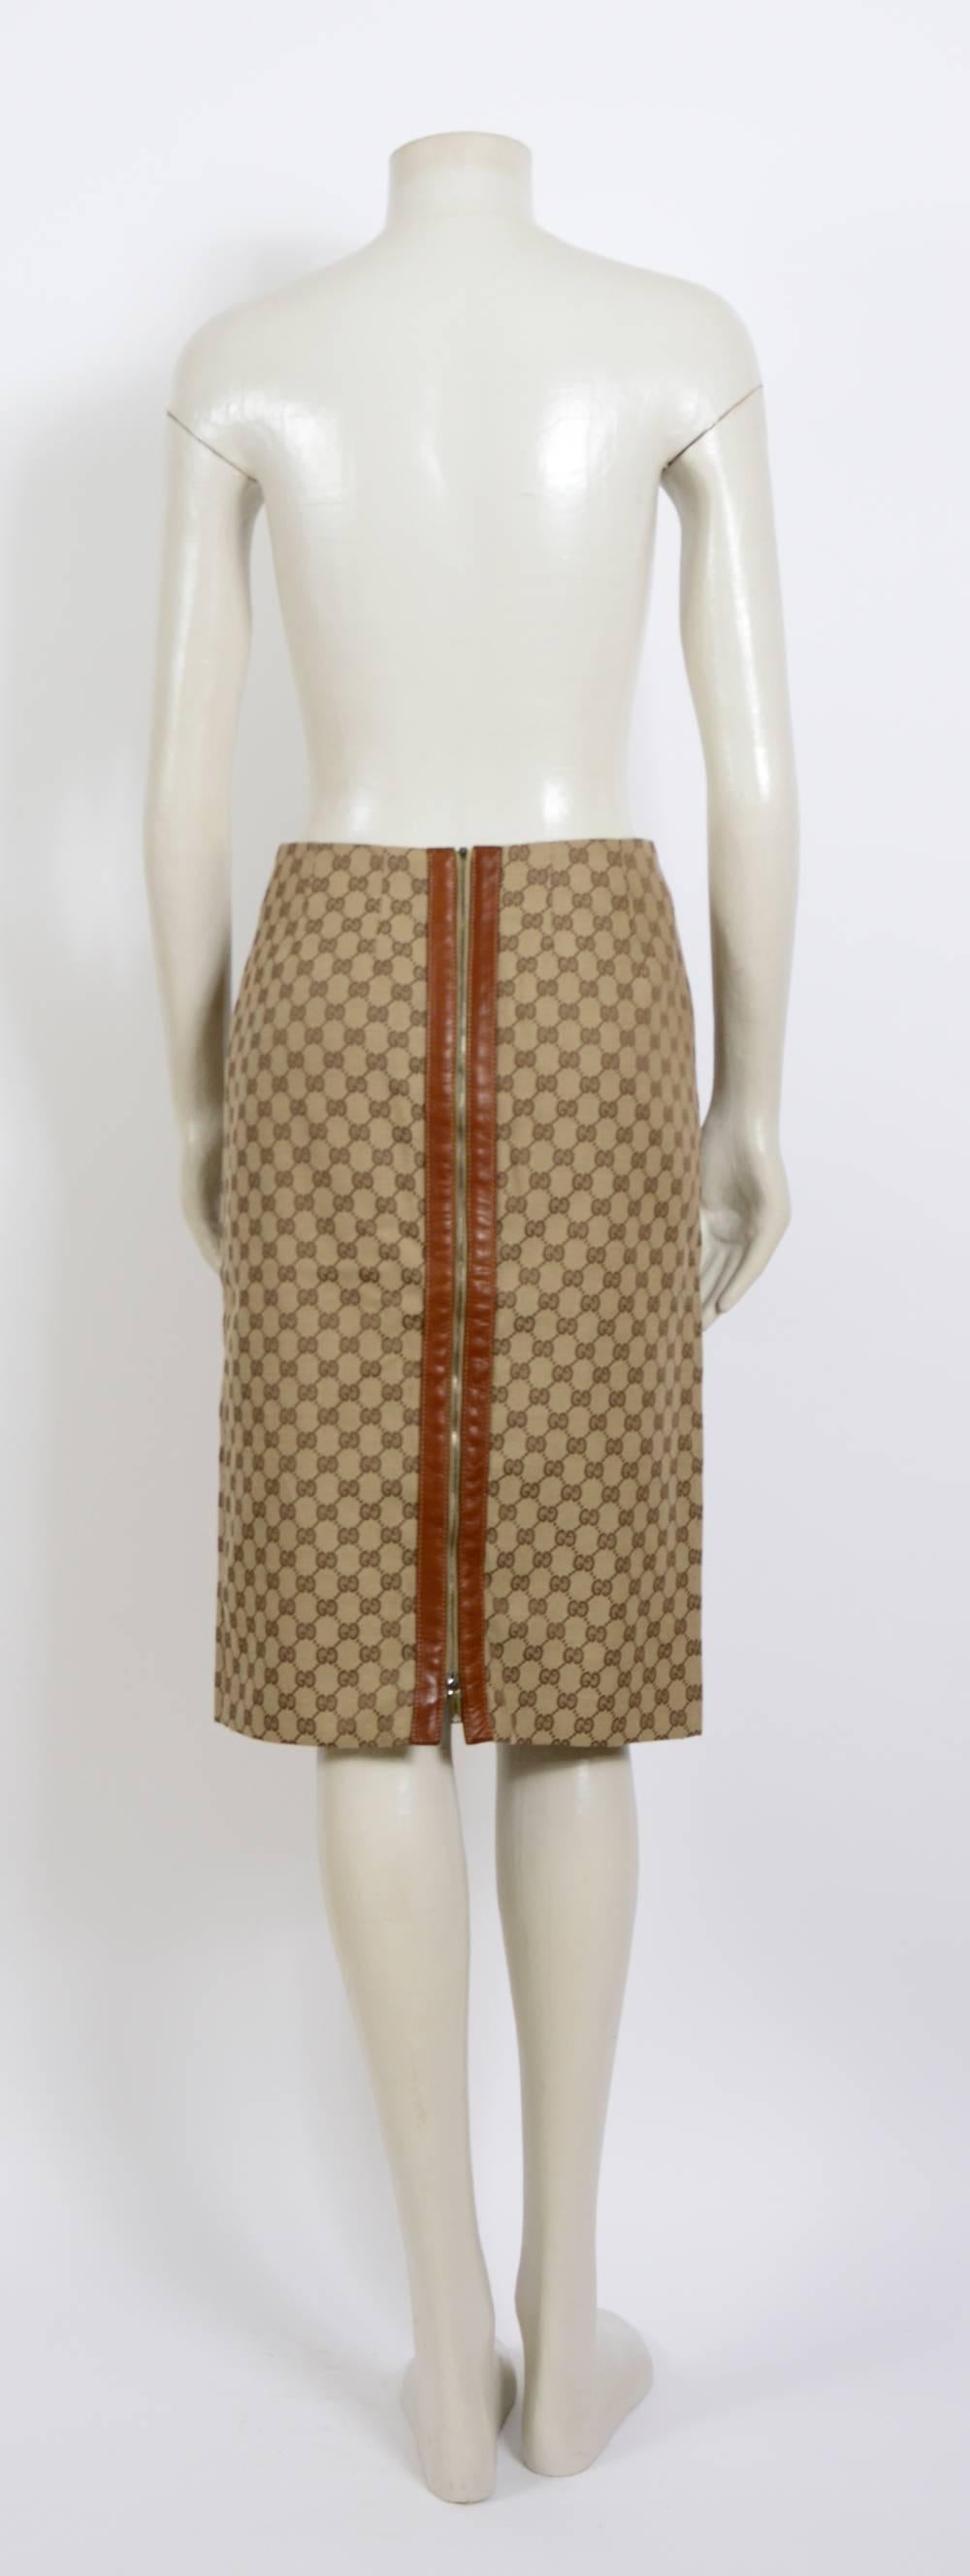 Women's Gucci By Tom Ford Leather Trim Logo Skirt with Zipper Detail 